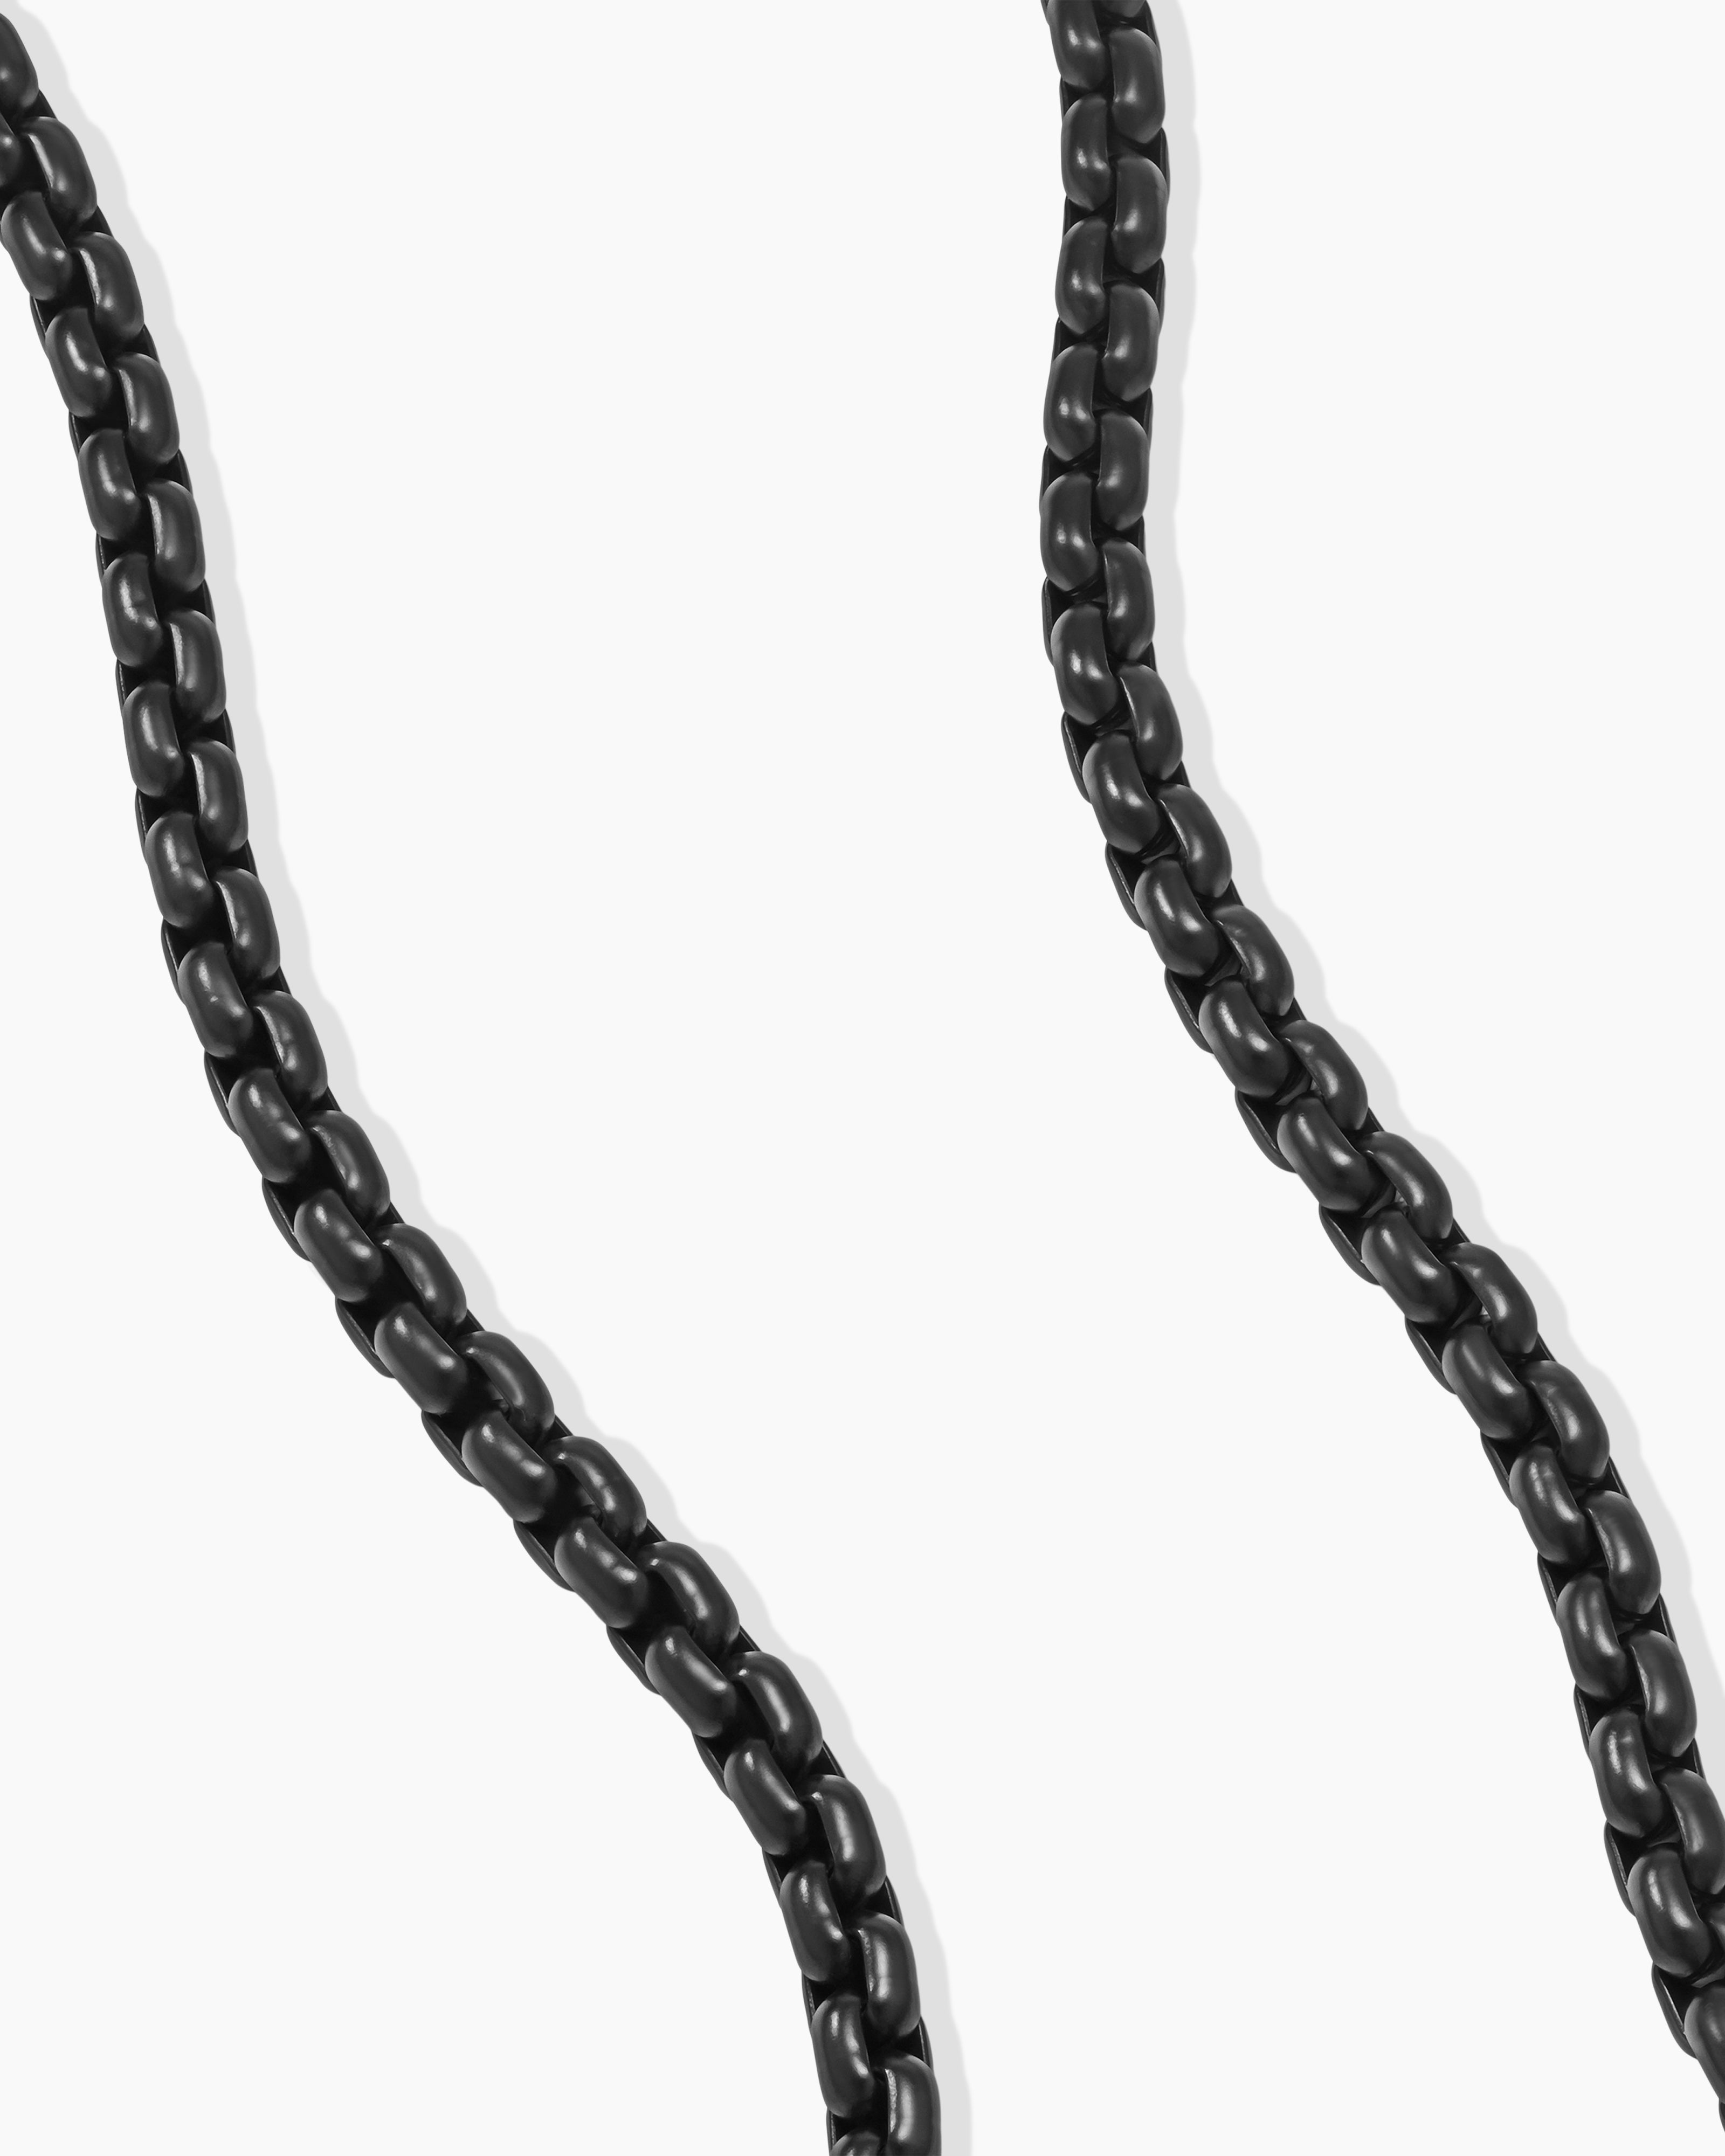 Campbell 0711077 Decorator CHAIN,197' #100 OBLONG,BLACK